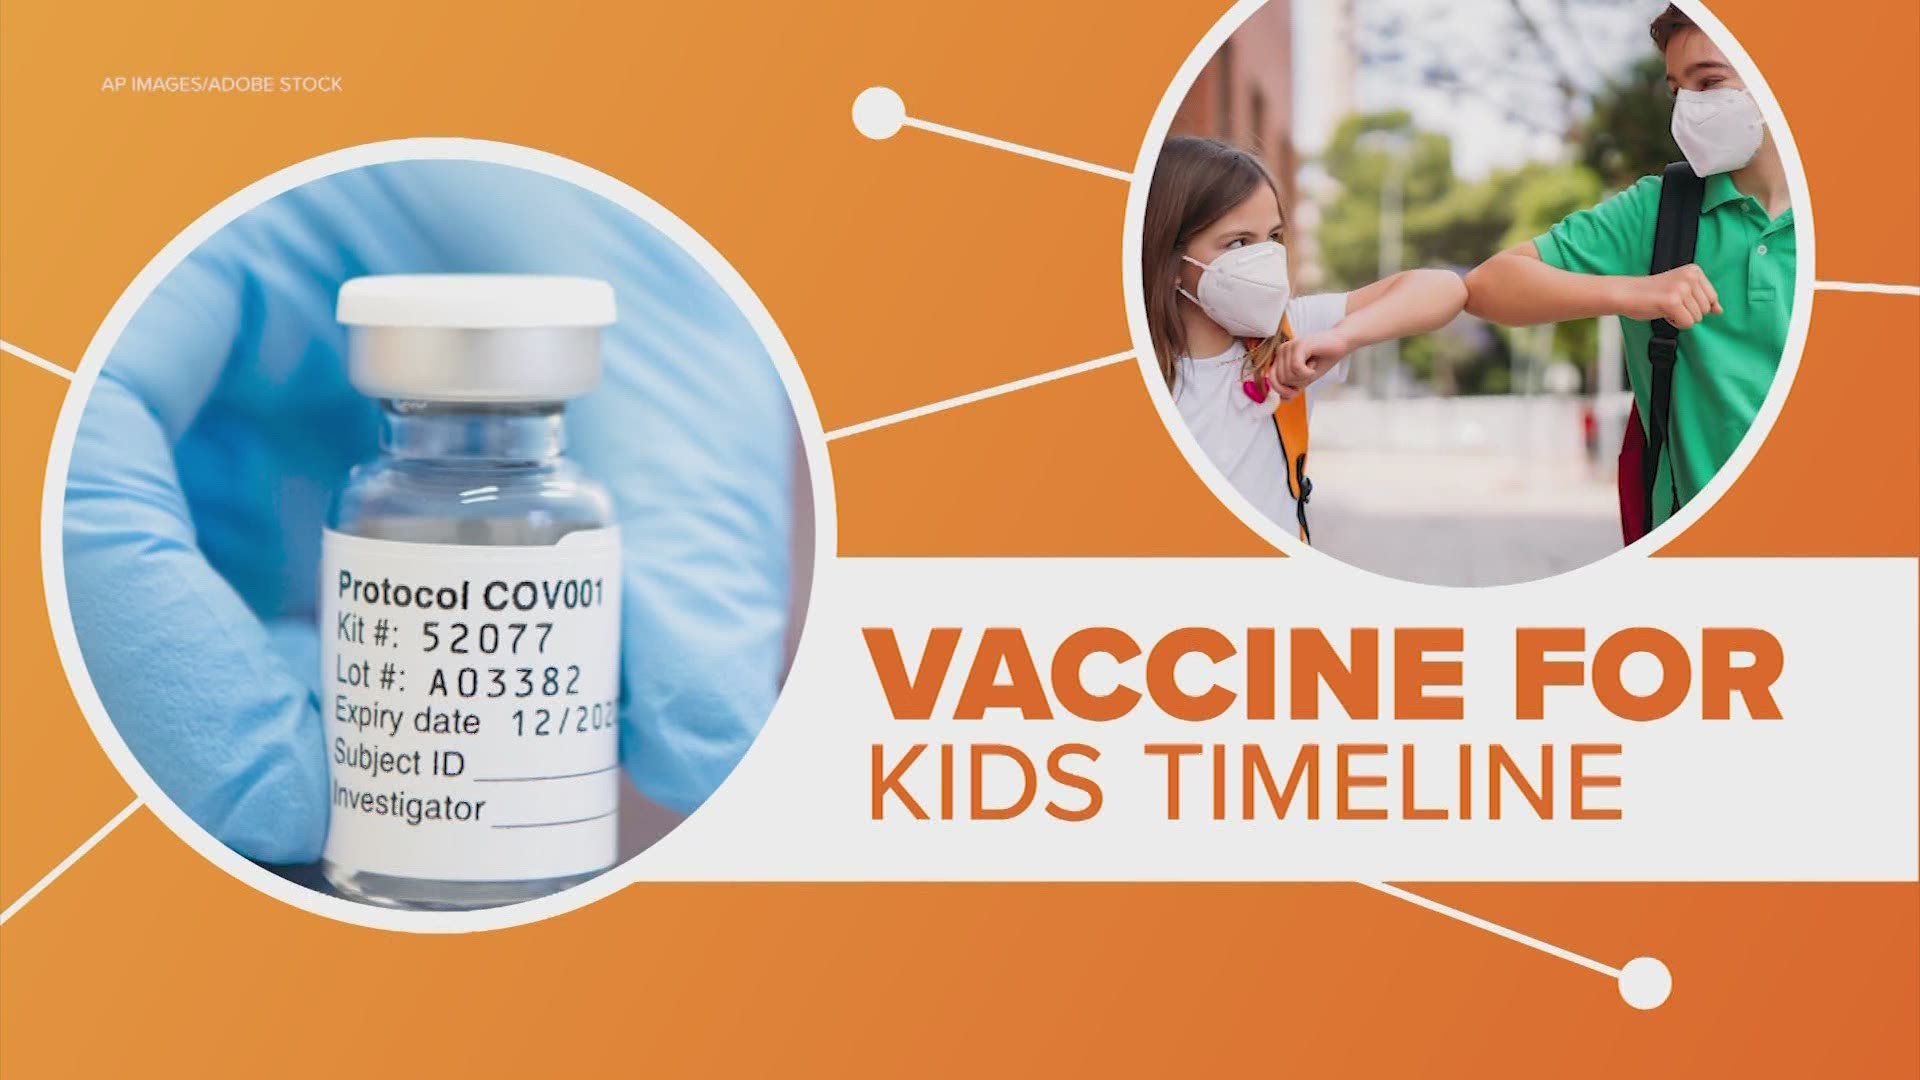 Vaccines for Teens 11 to 12 Years